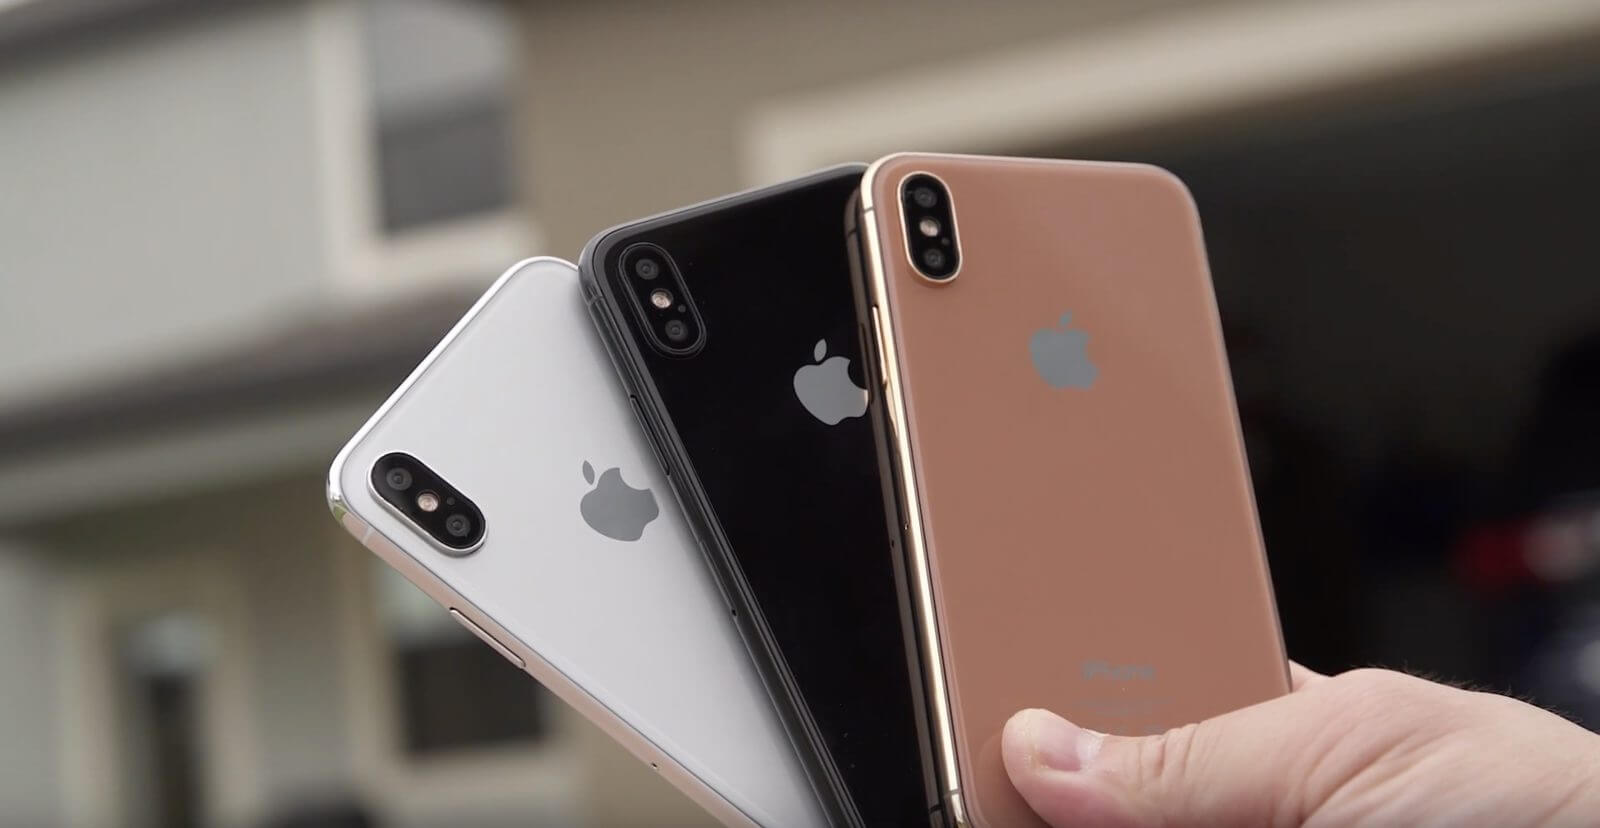 Apple sued over alleged patent infringement in iPhone 7, 8 dual-camera tech